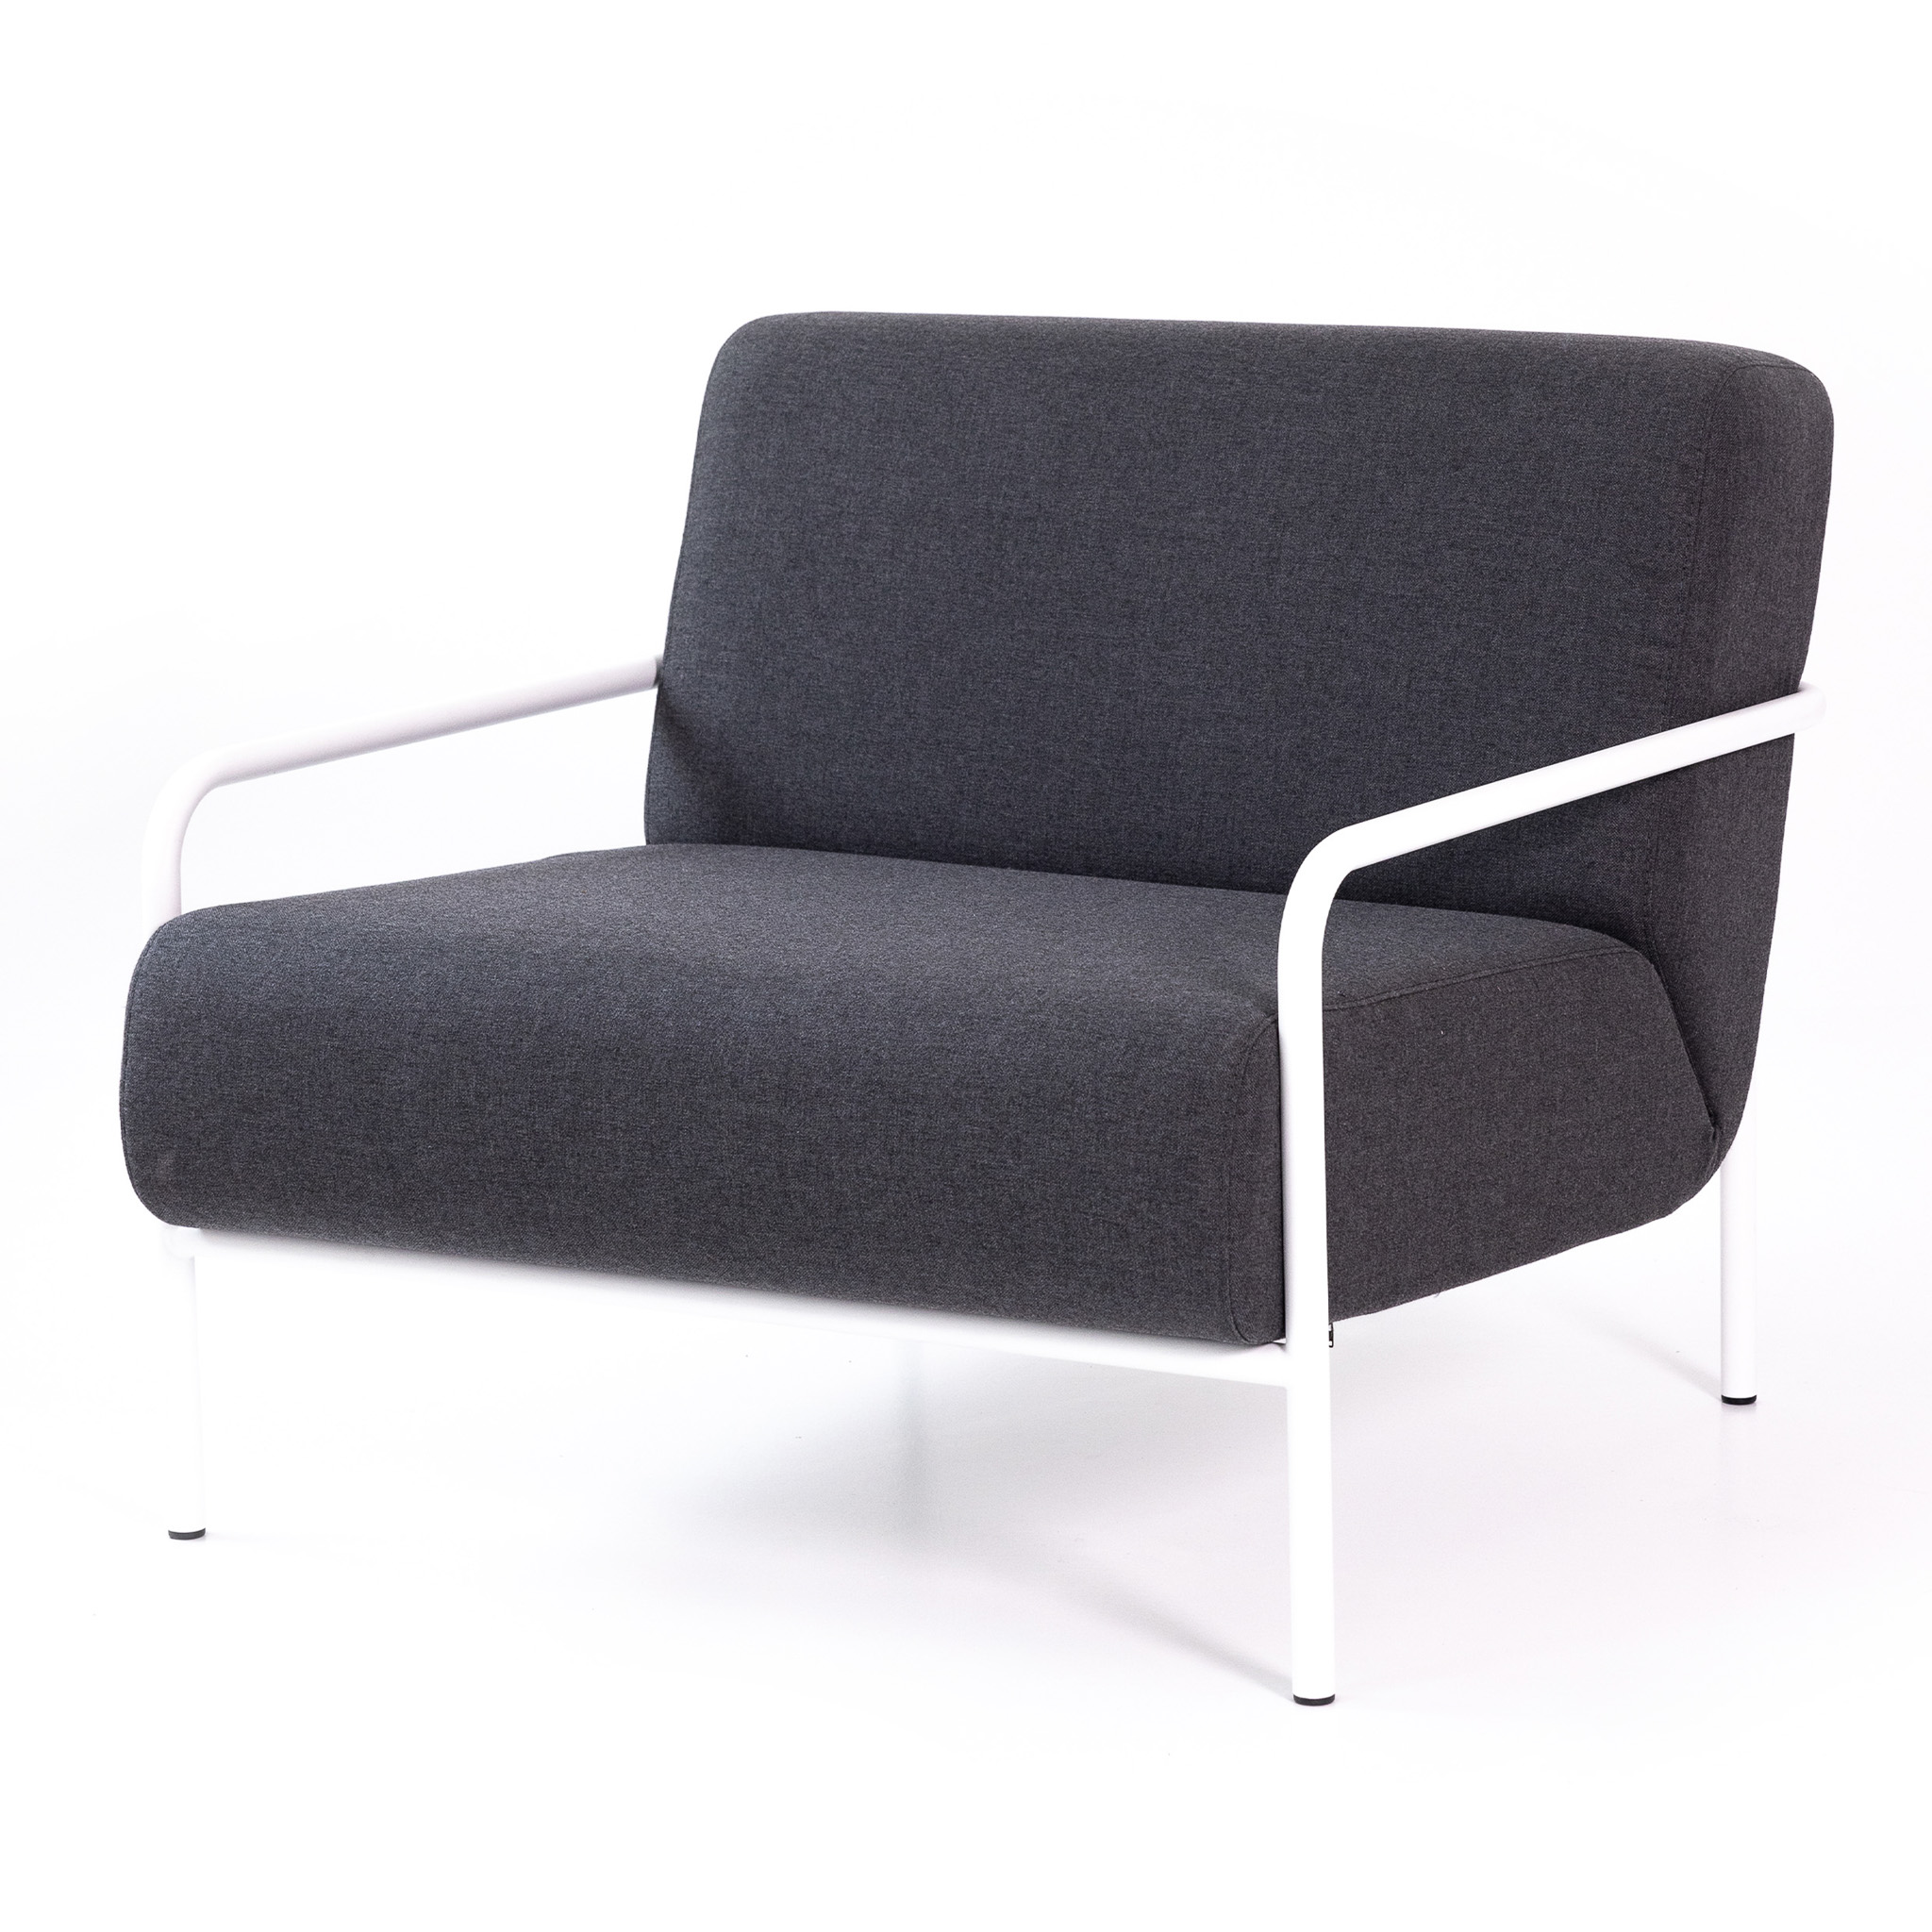 METALLBUDE // SOLEA - OUTDOOR LOUNGE CHAIR | WHITE - ANTHRACITE CUSHION